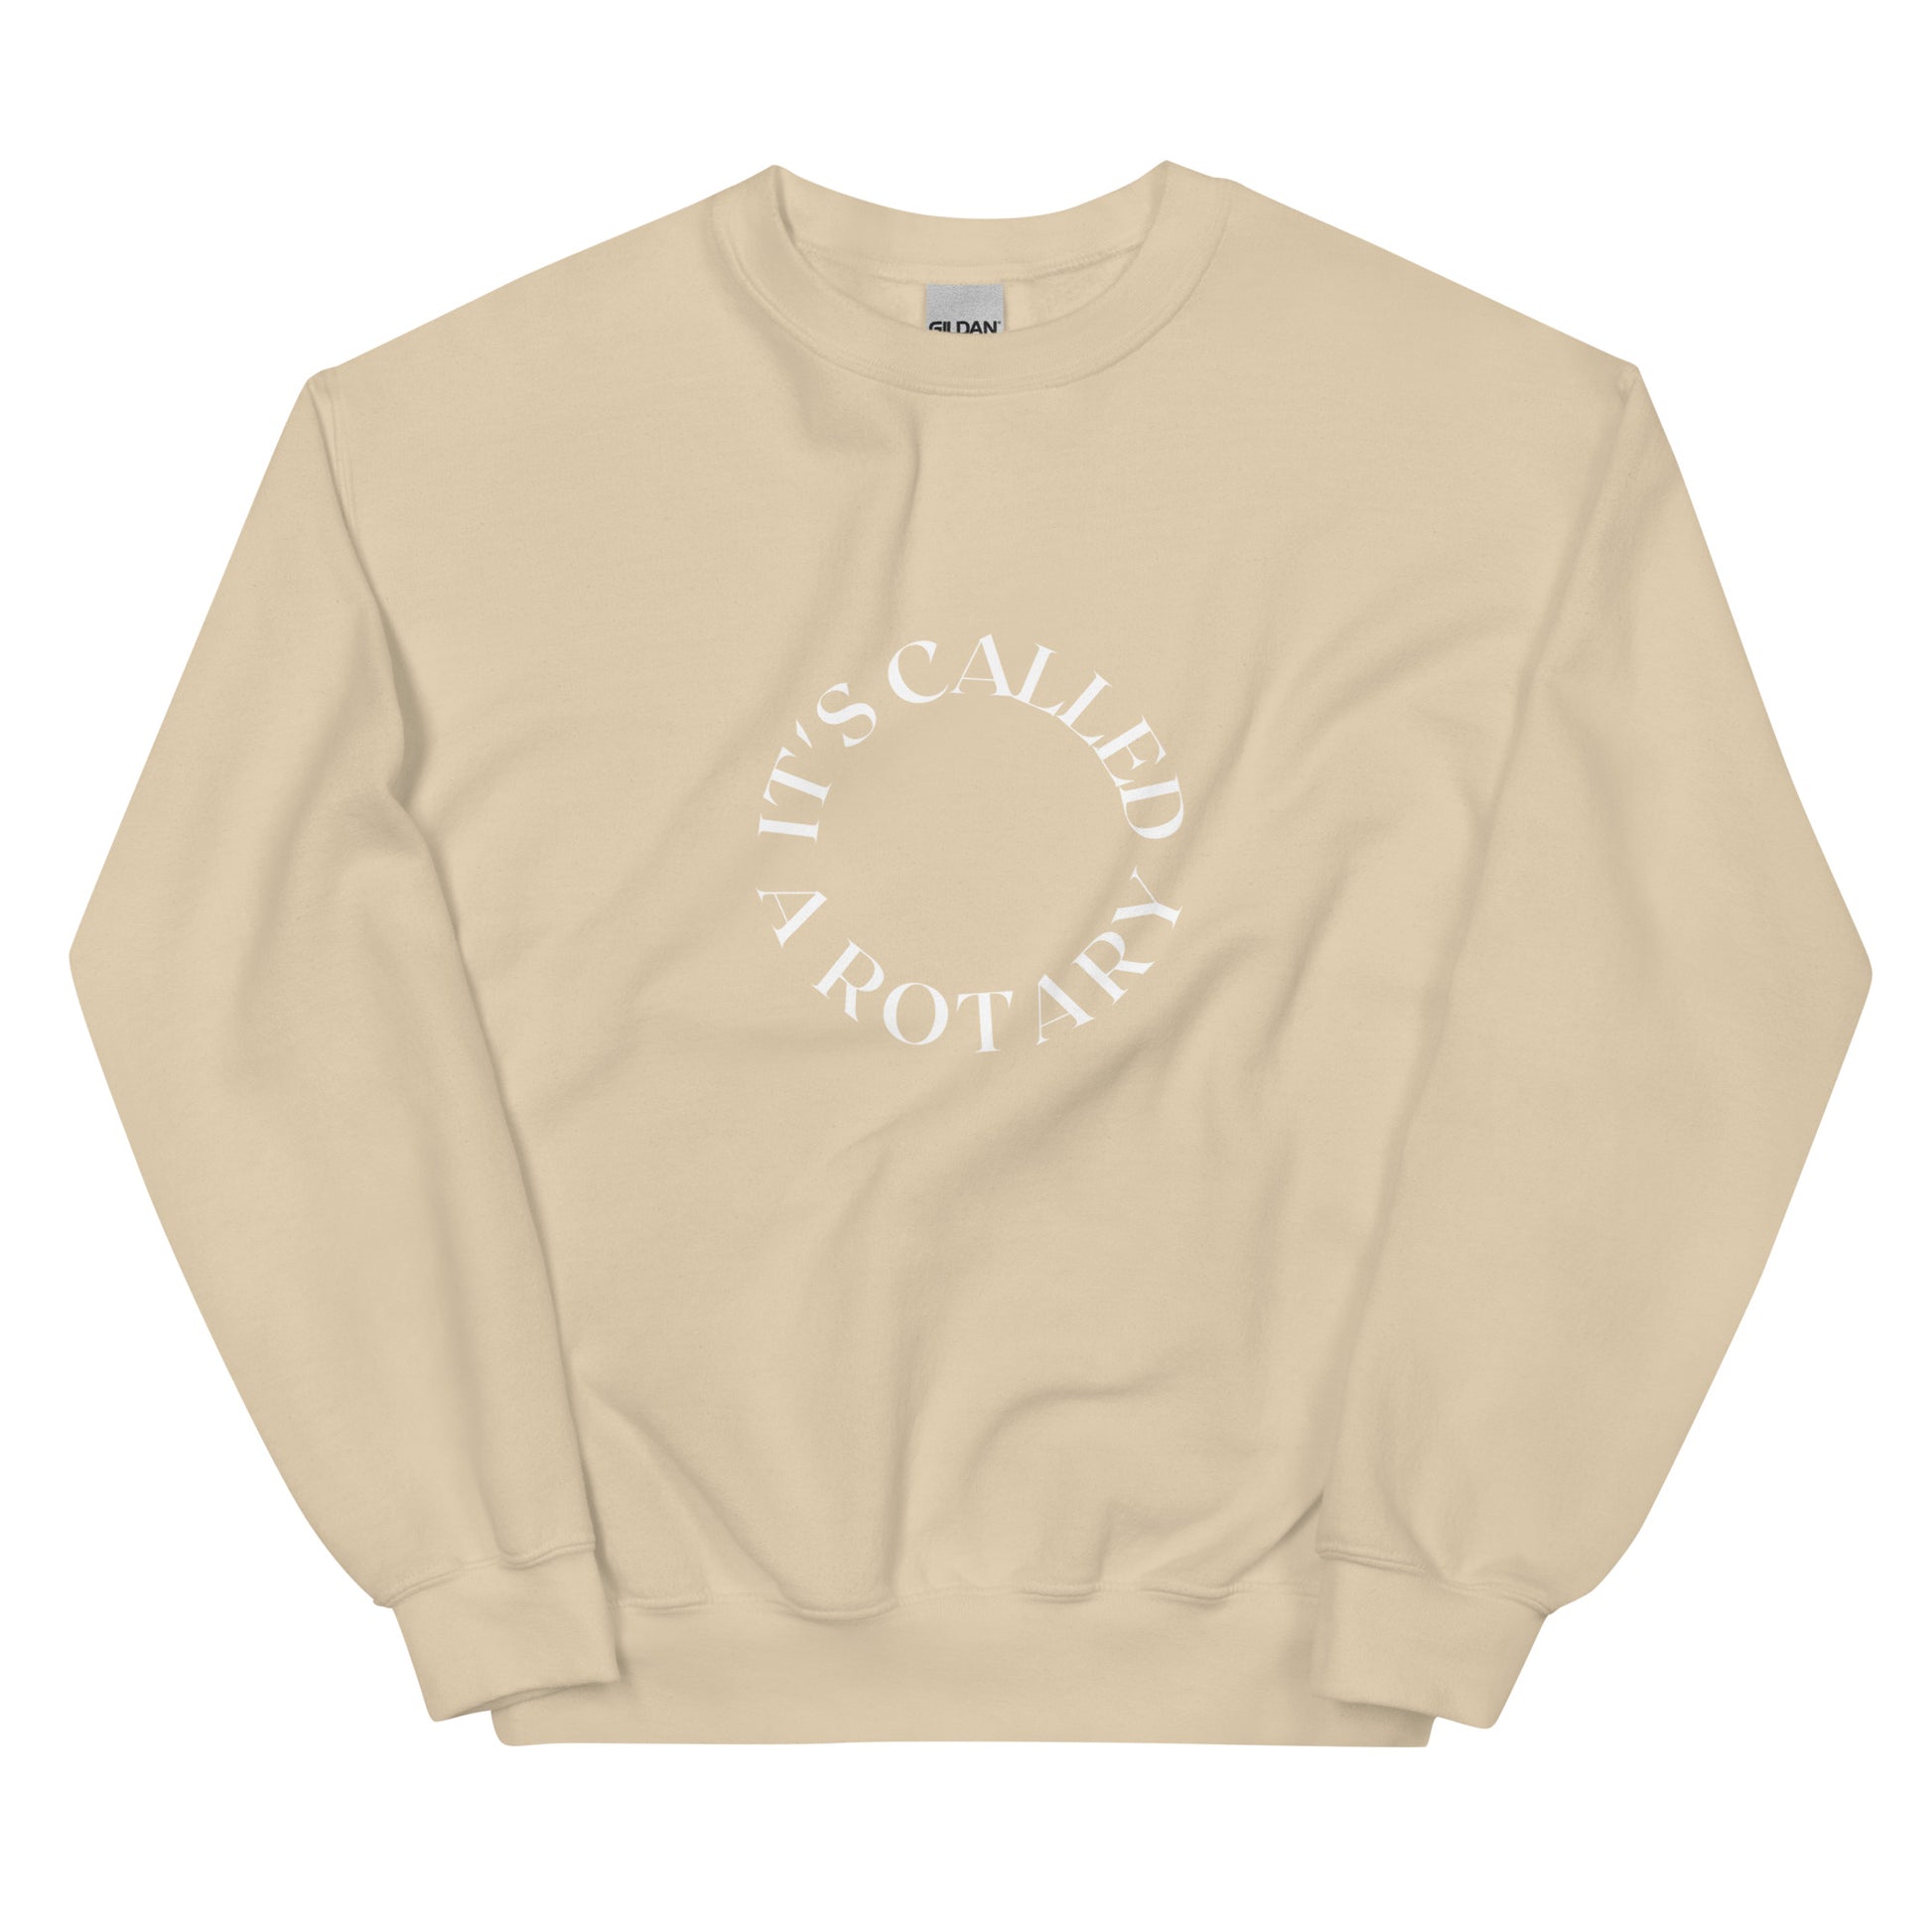 tan crewneck that says "it's called a rotary" in white lettering shaped in a circle